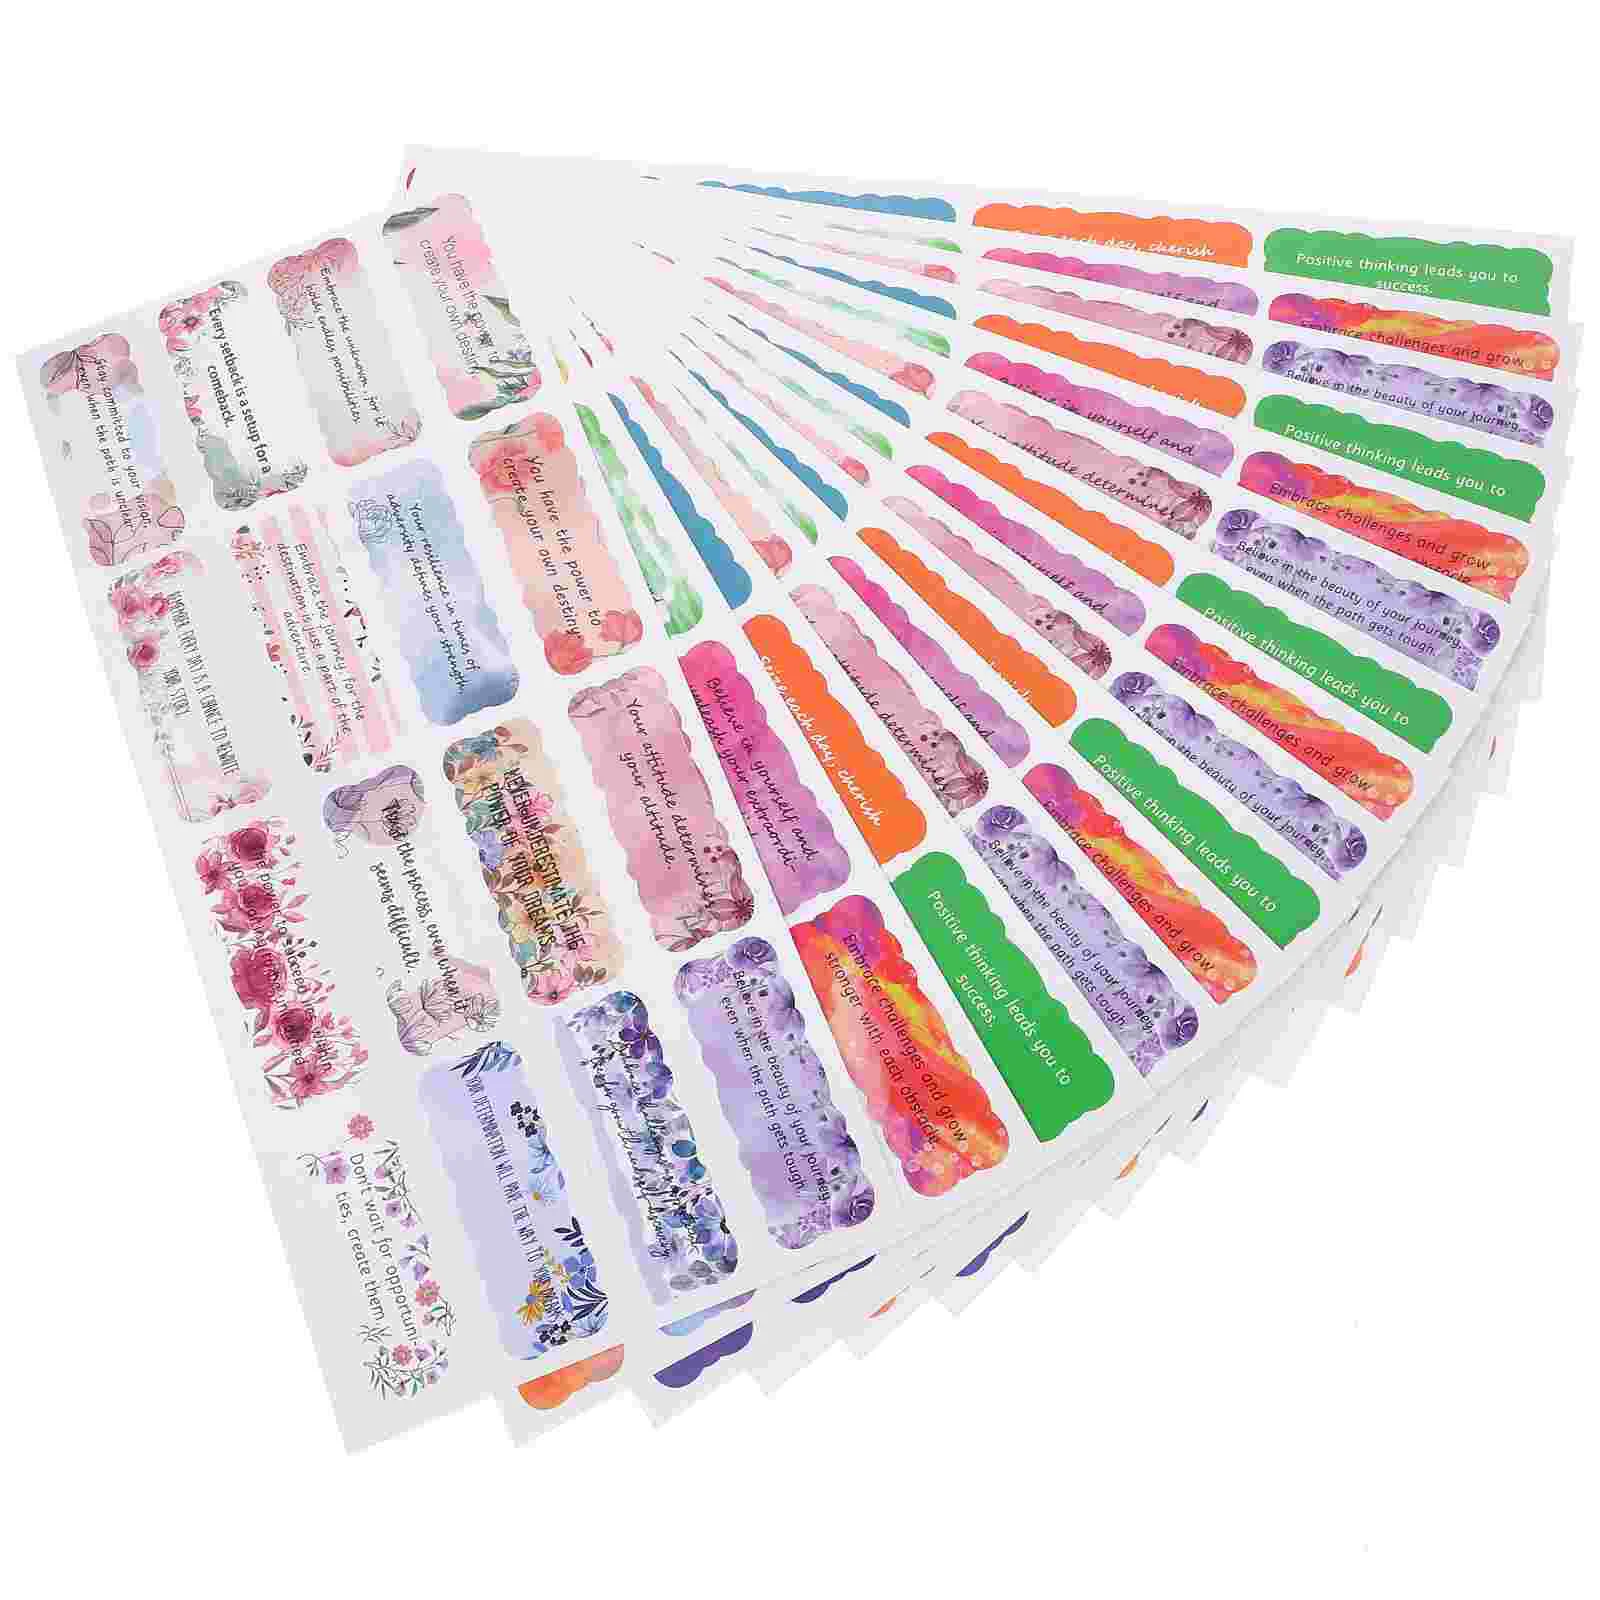 

240 Pcs Inspirational Stickers For Journaling Quotes Scrapbook Supplies Paper Decals